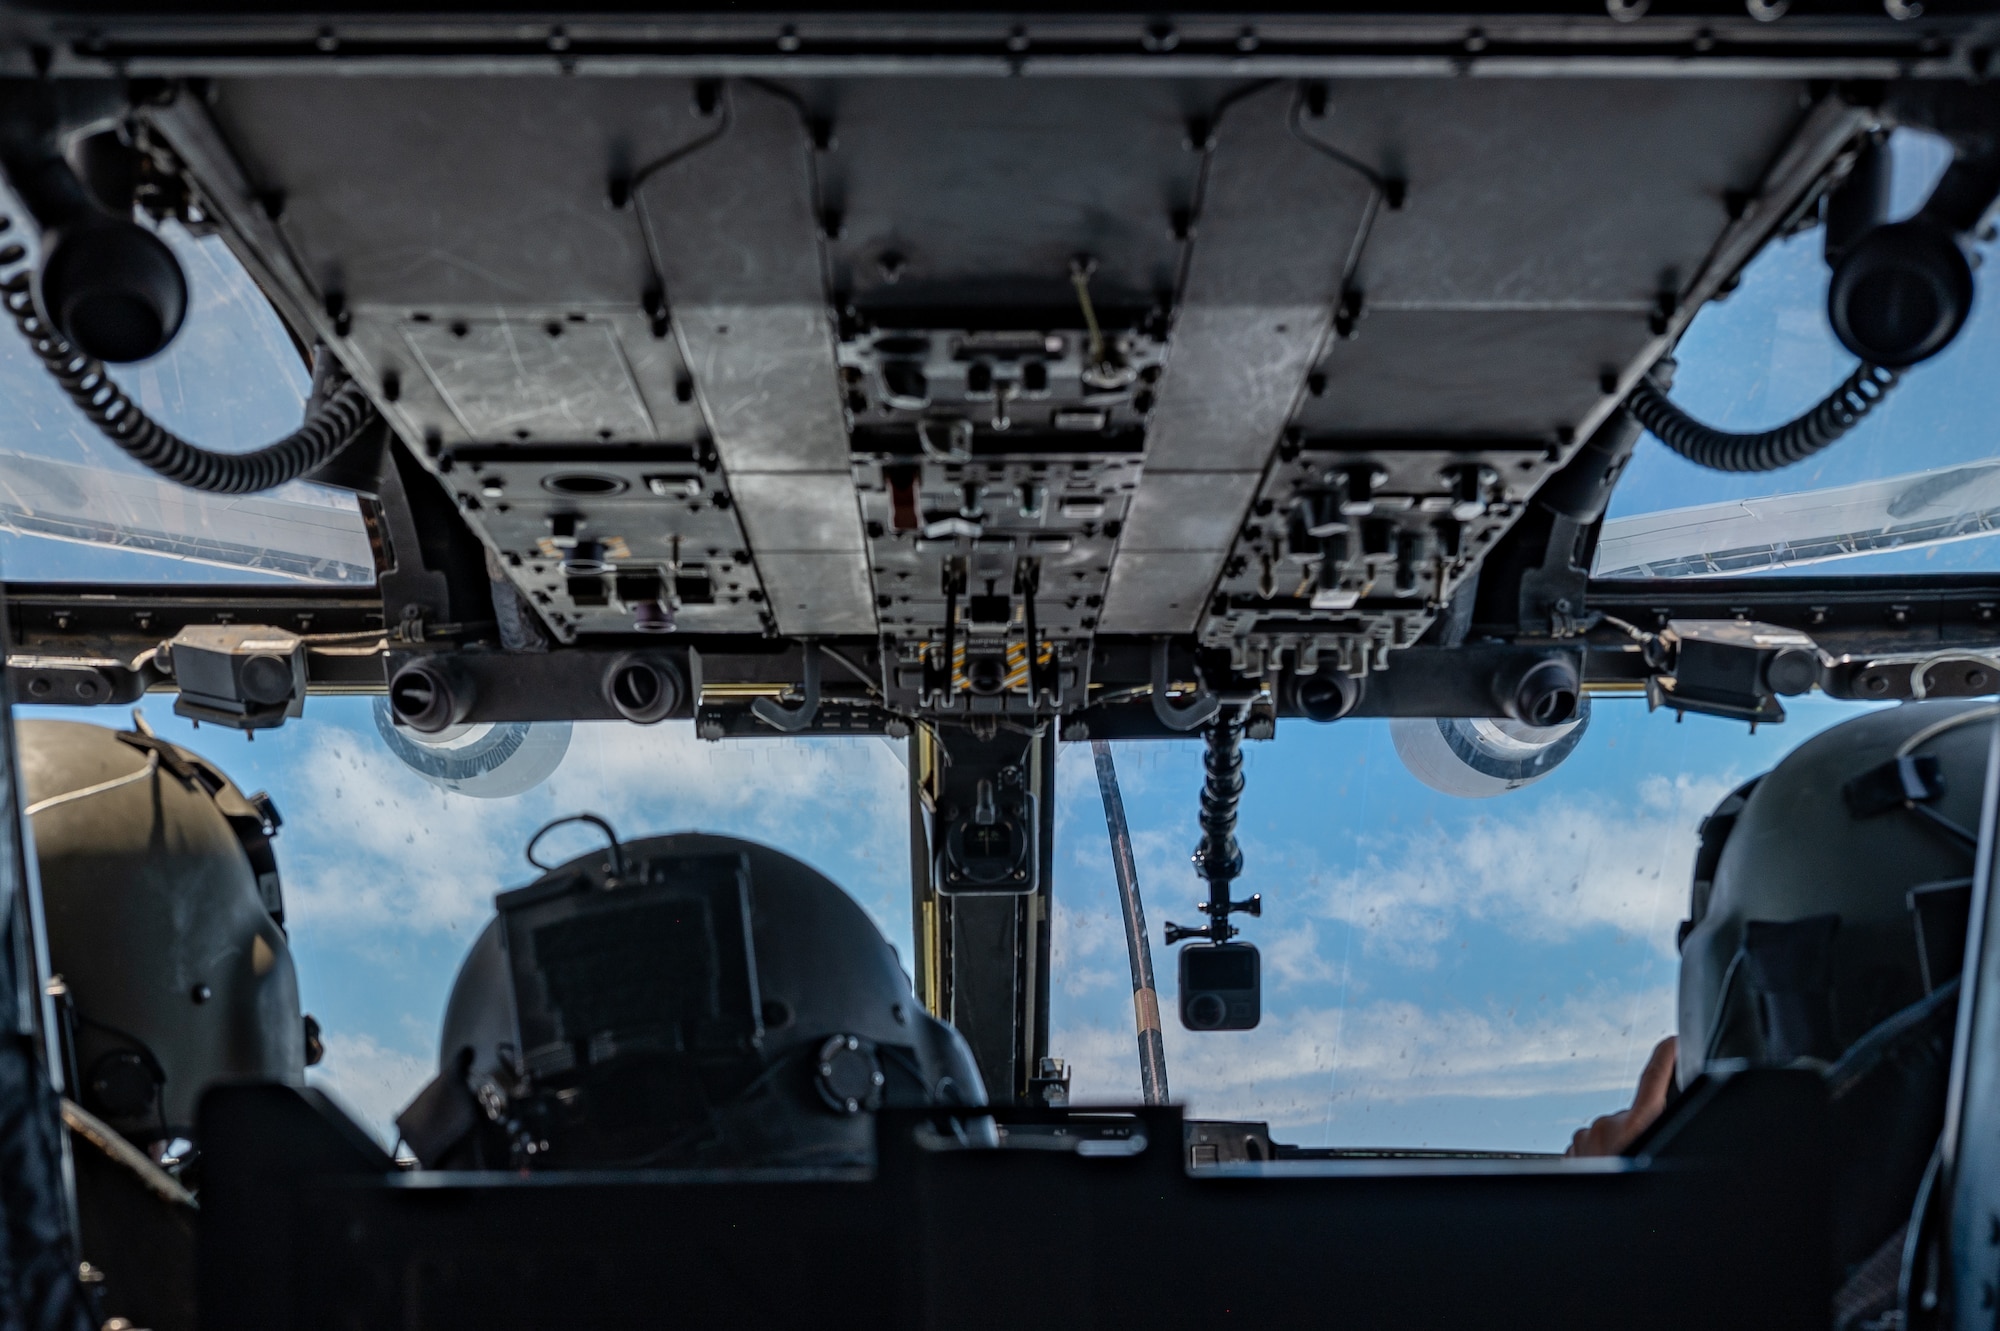 A photo from the cockpit of a CV-22.